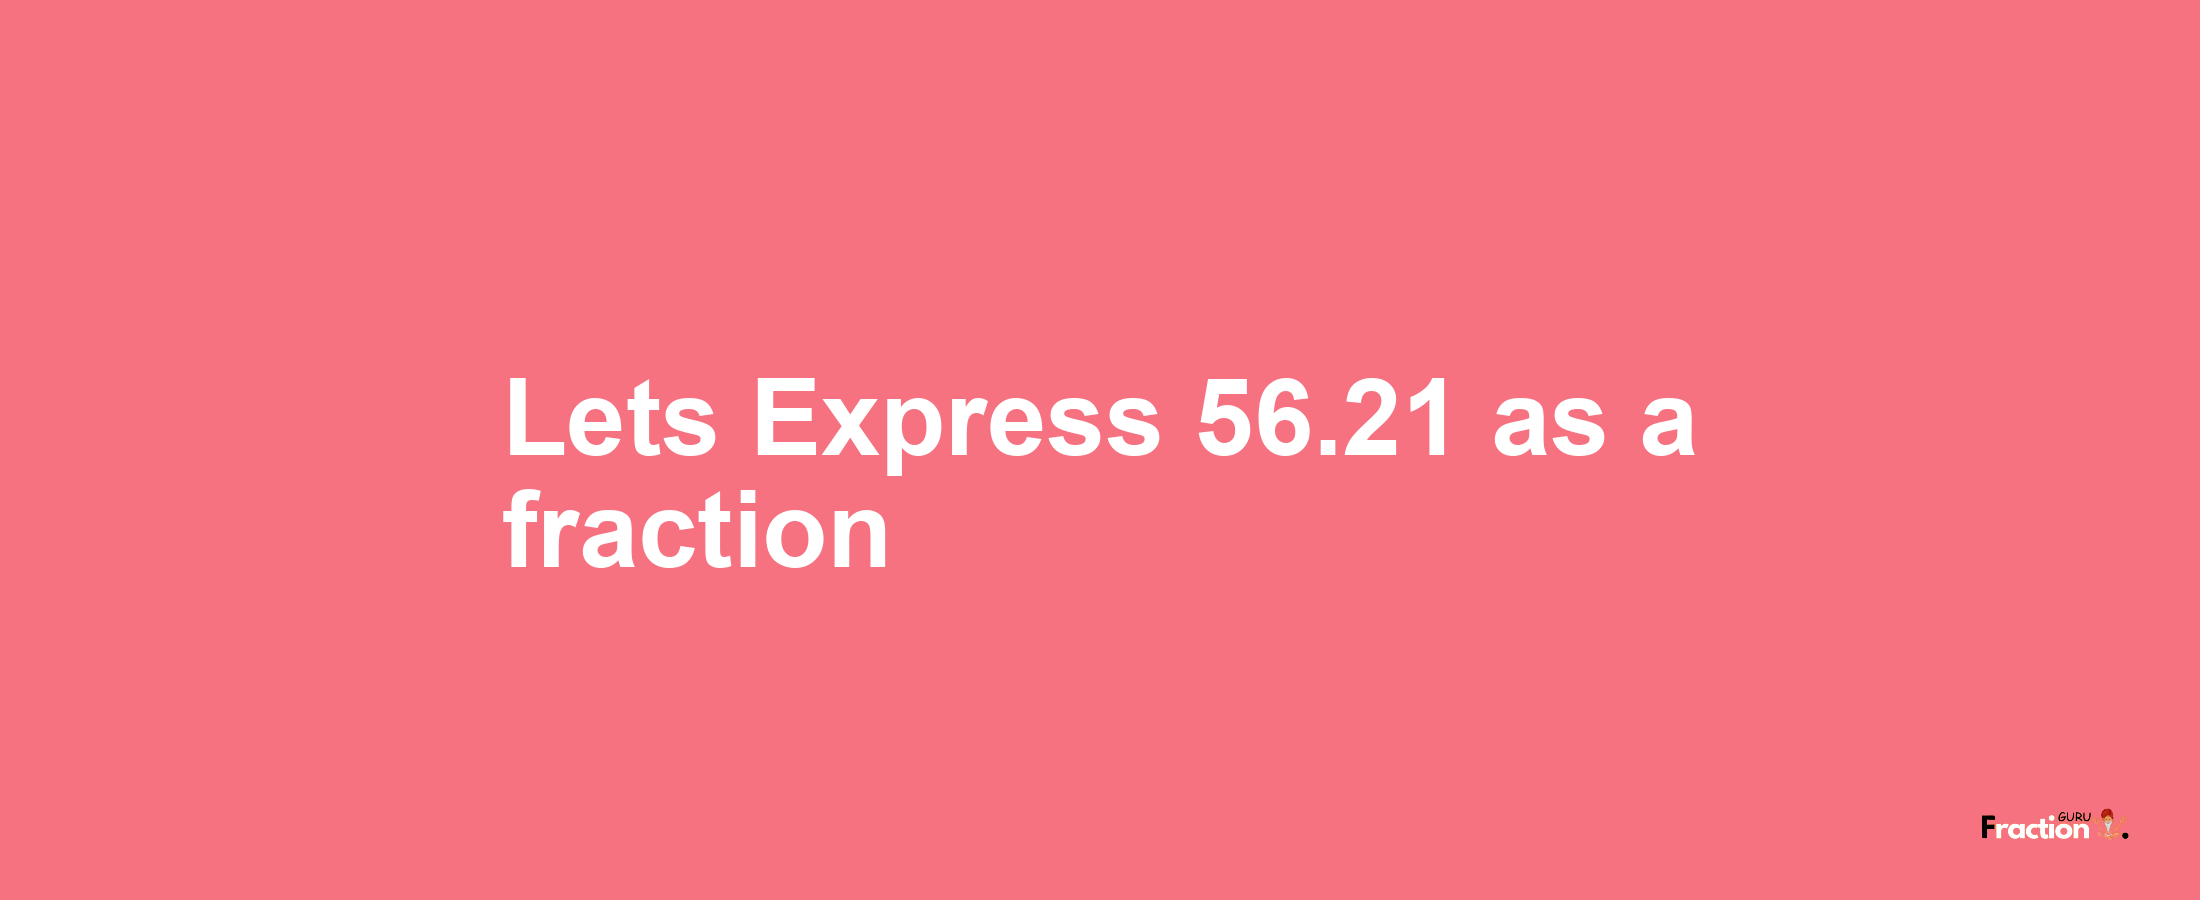 Lets Express 56.21 as afraction